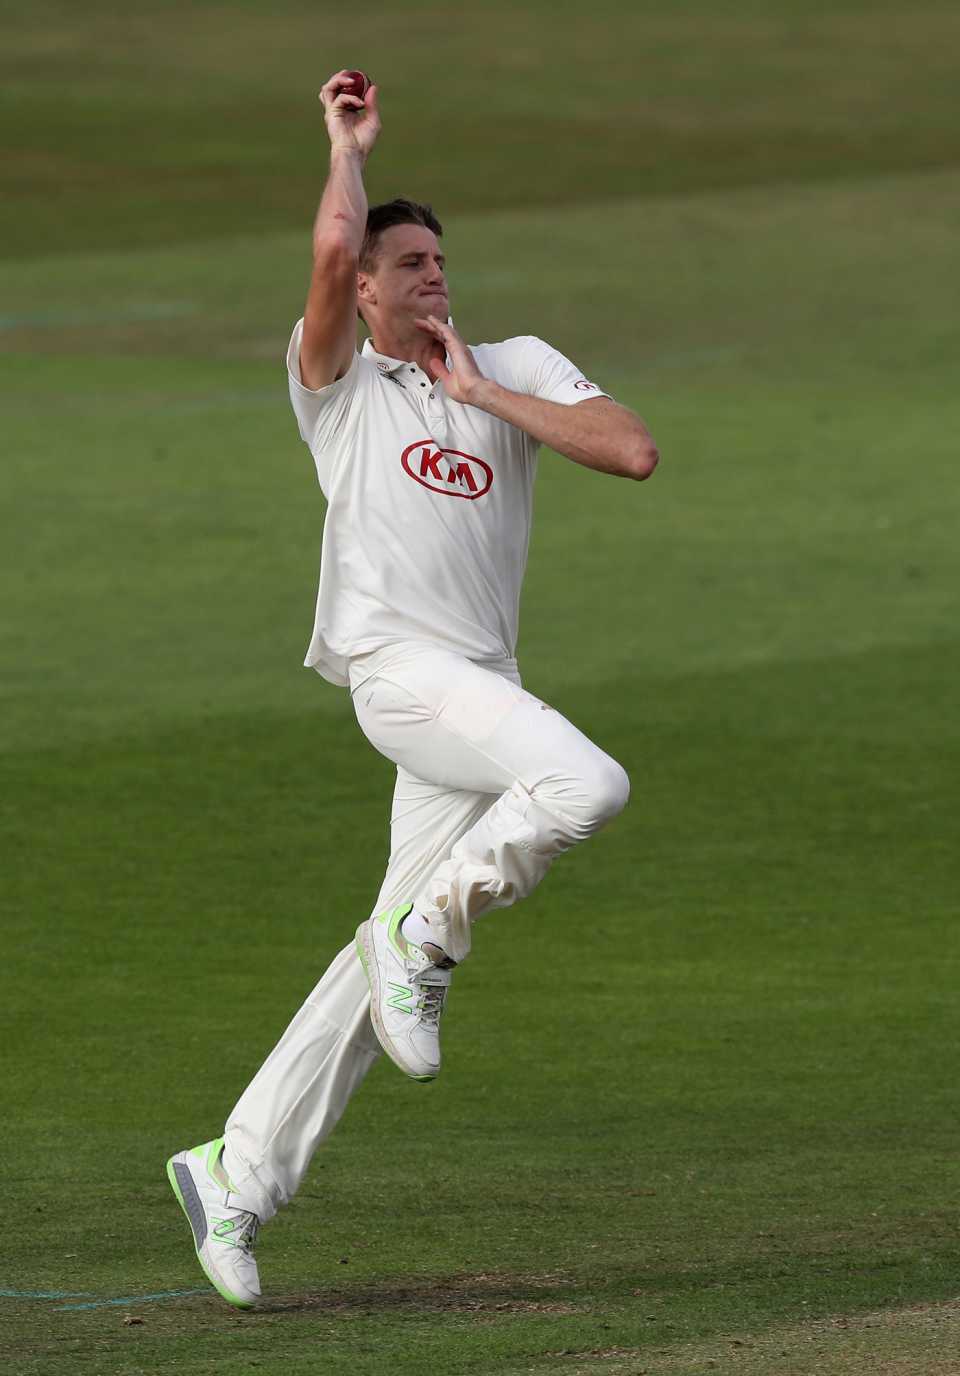 Morne Morkel has been an influential Surrey signing